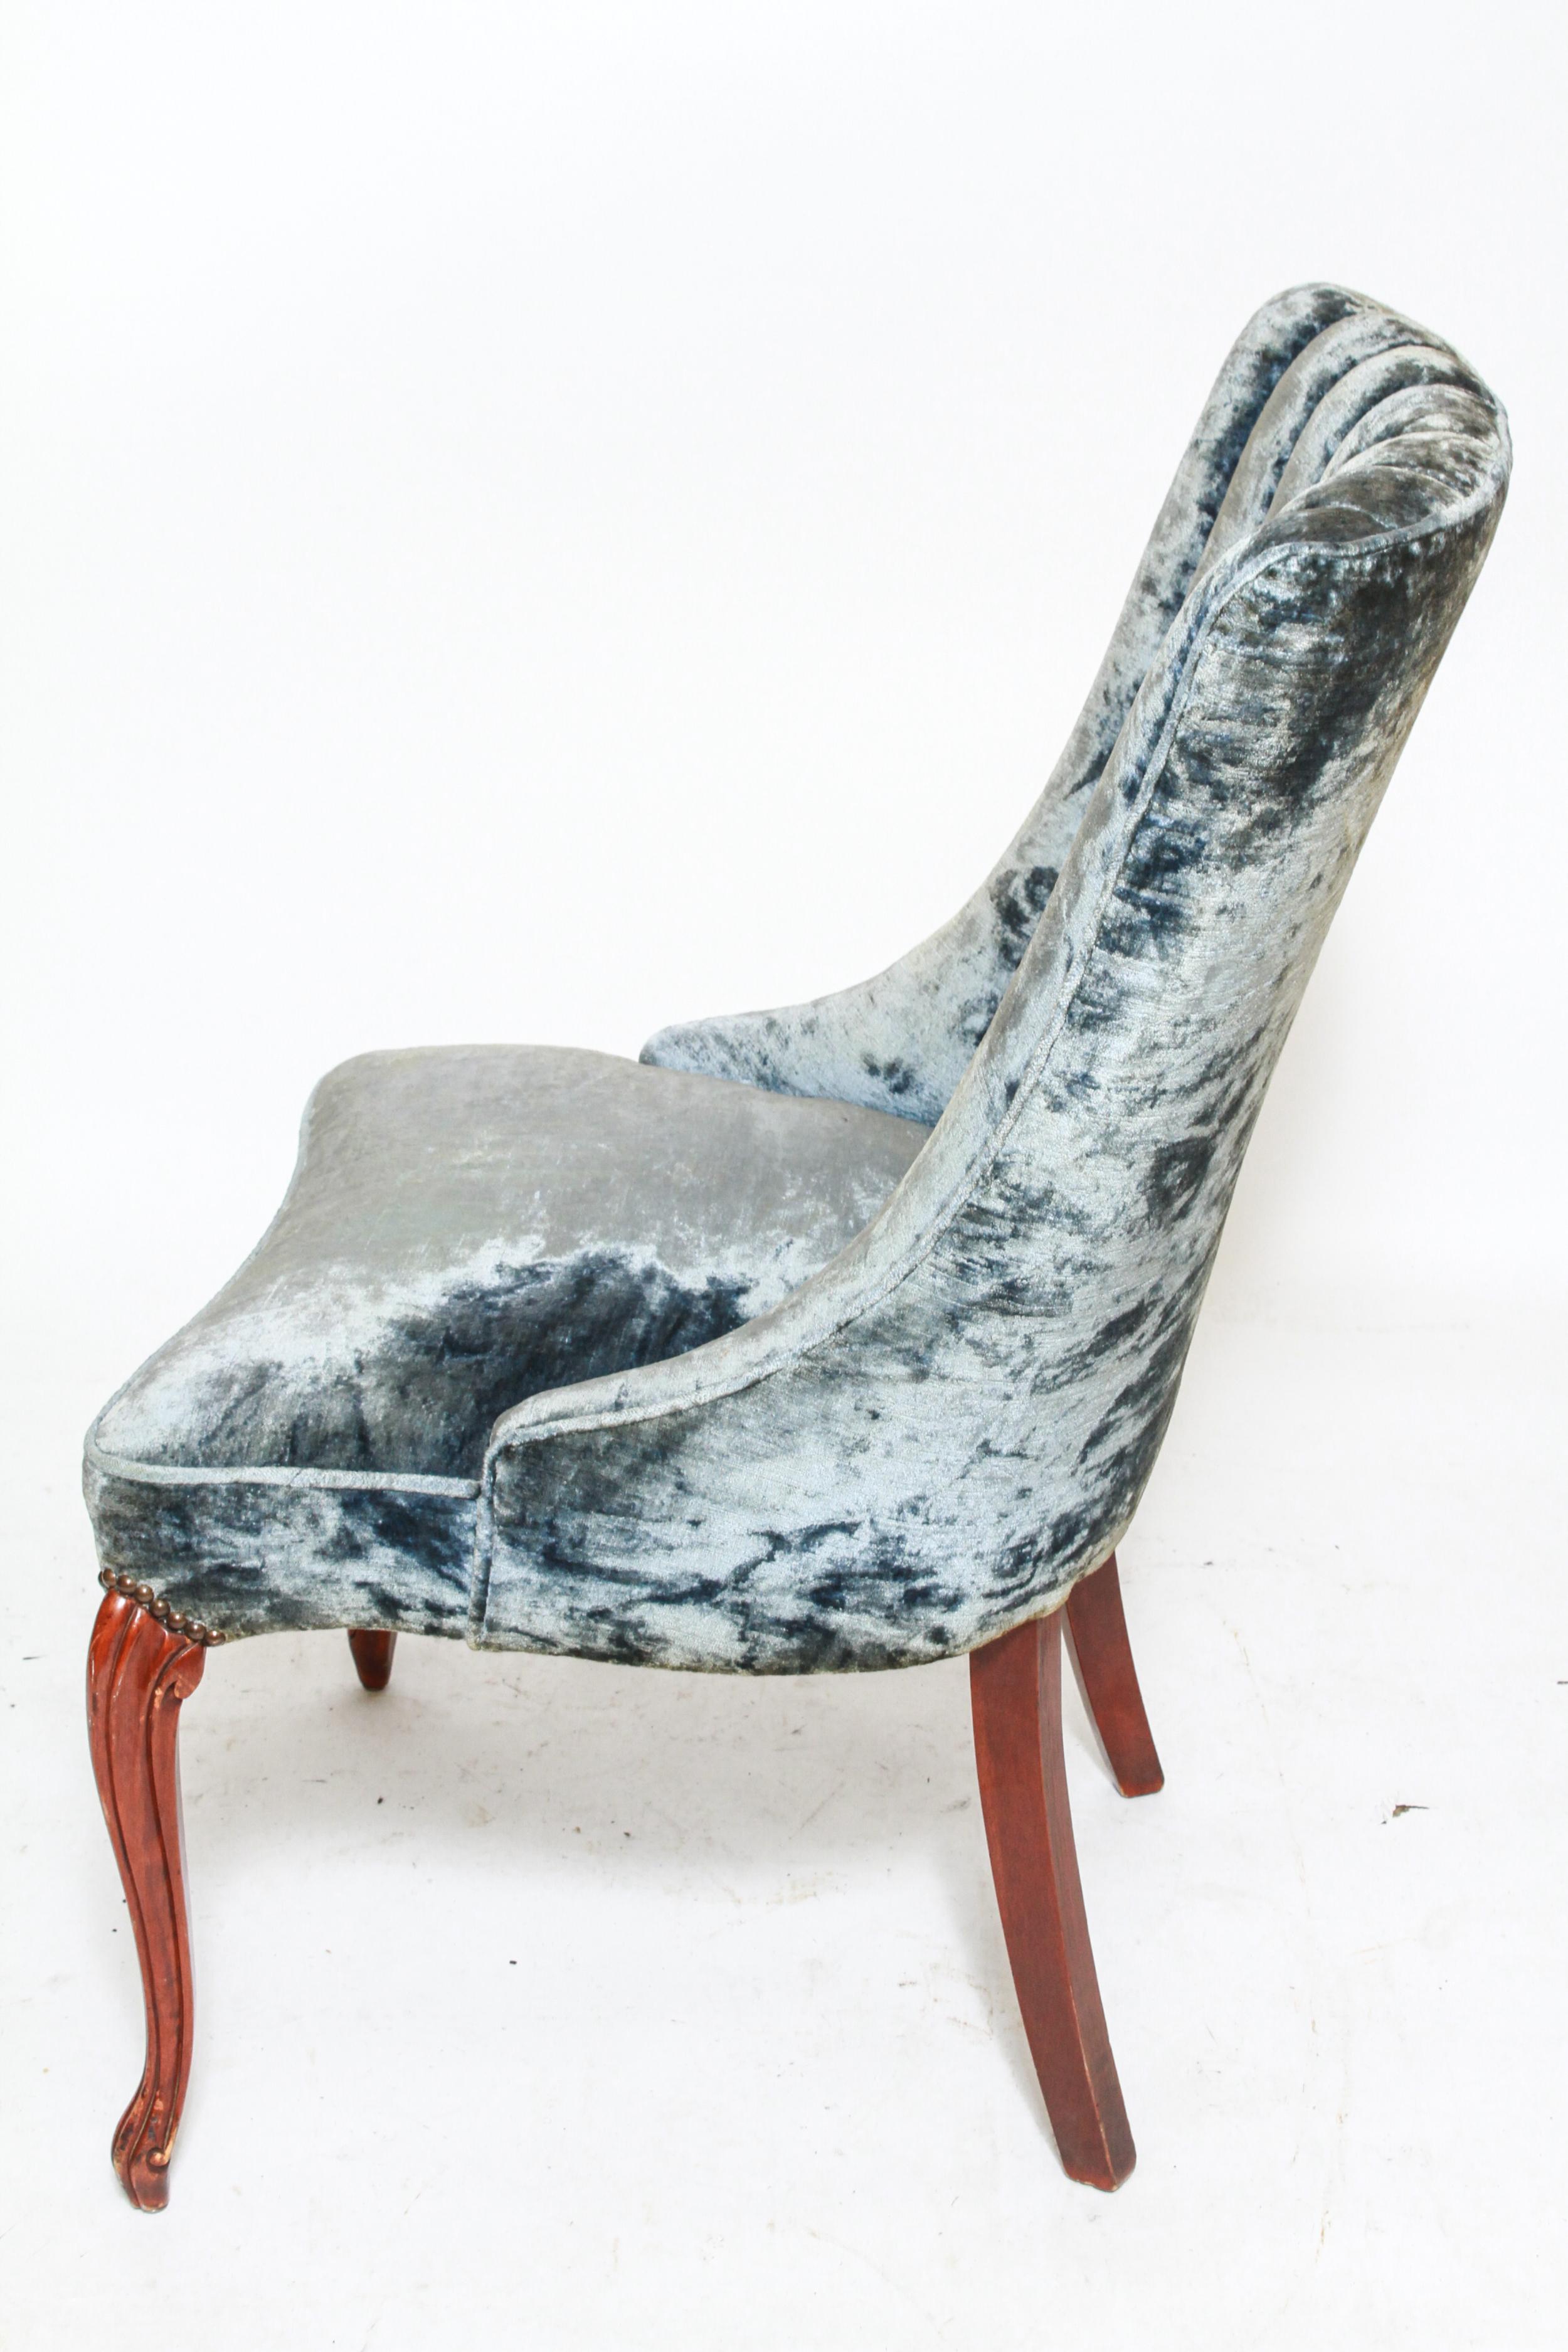 Art Deco period upholstered blue velvet channel-back side chair with carved cabriole front legs. The piece is in great vintage condition with minimal age-related wear to the legs.